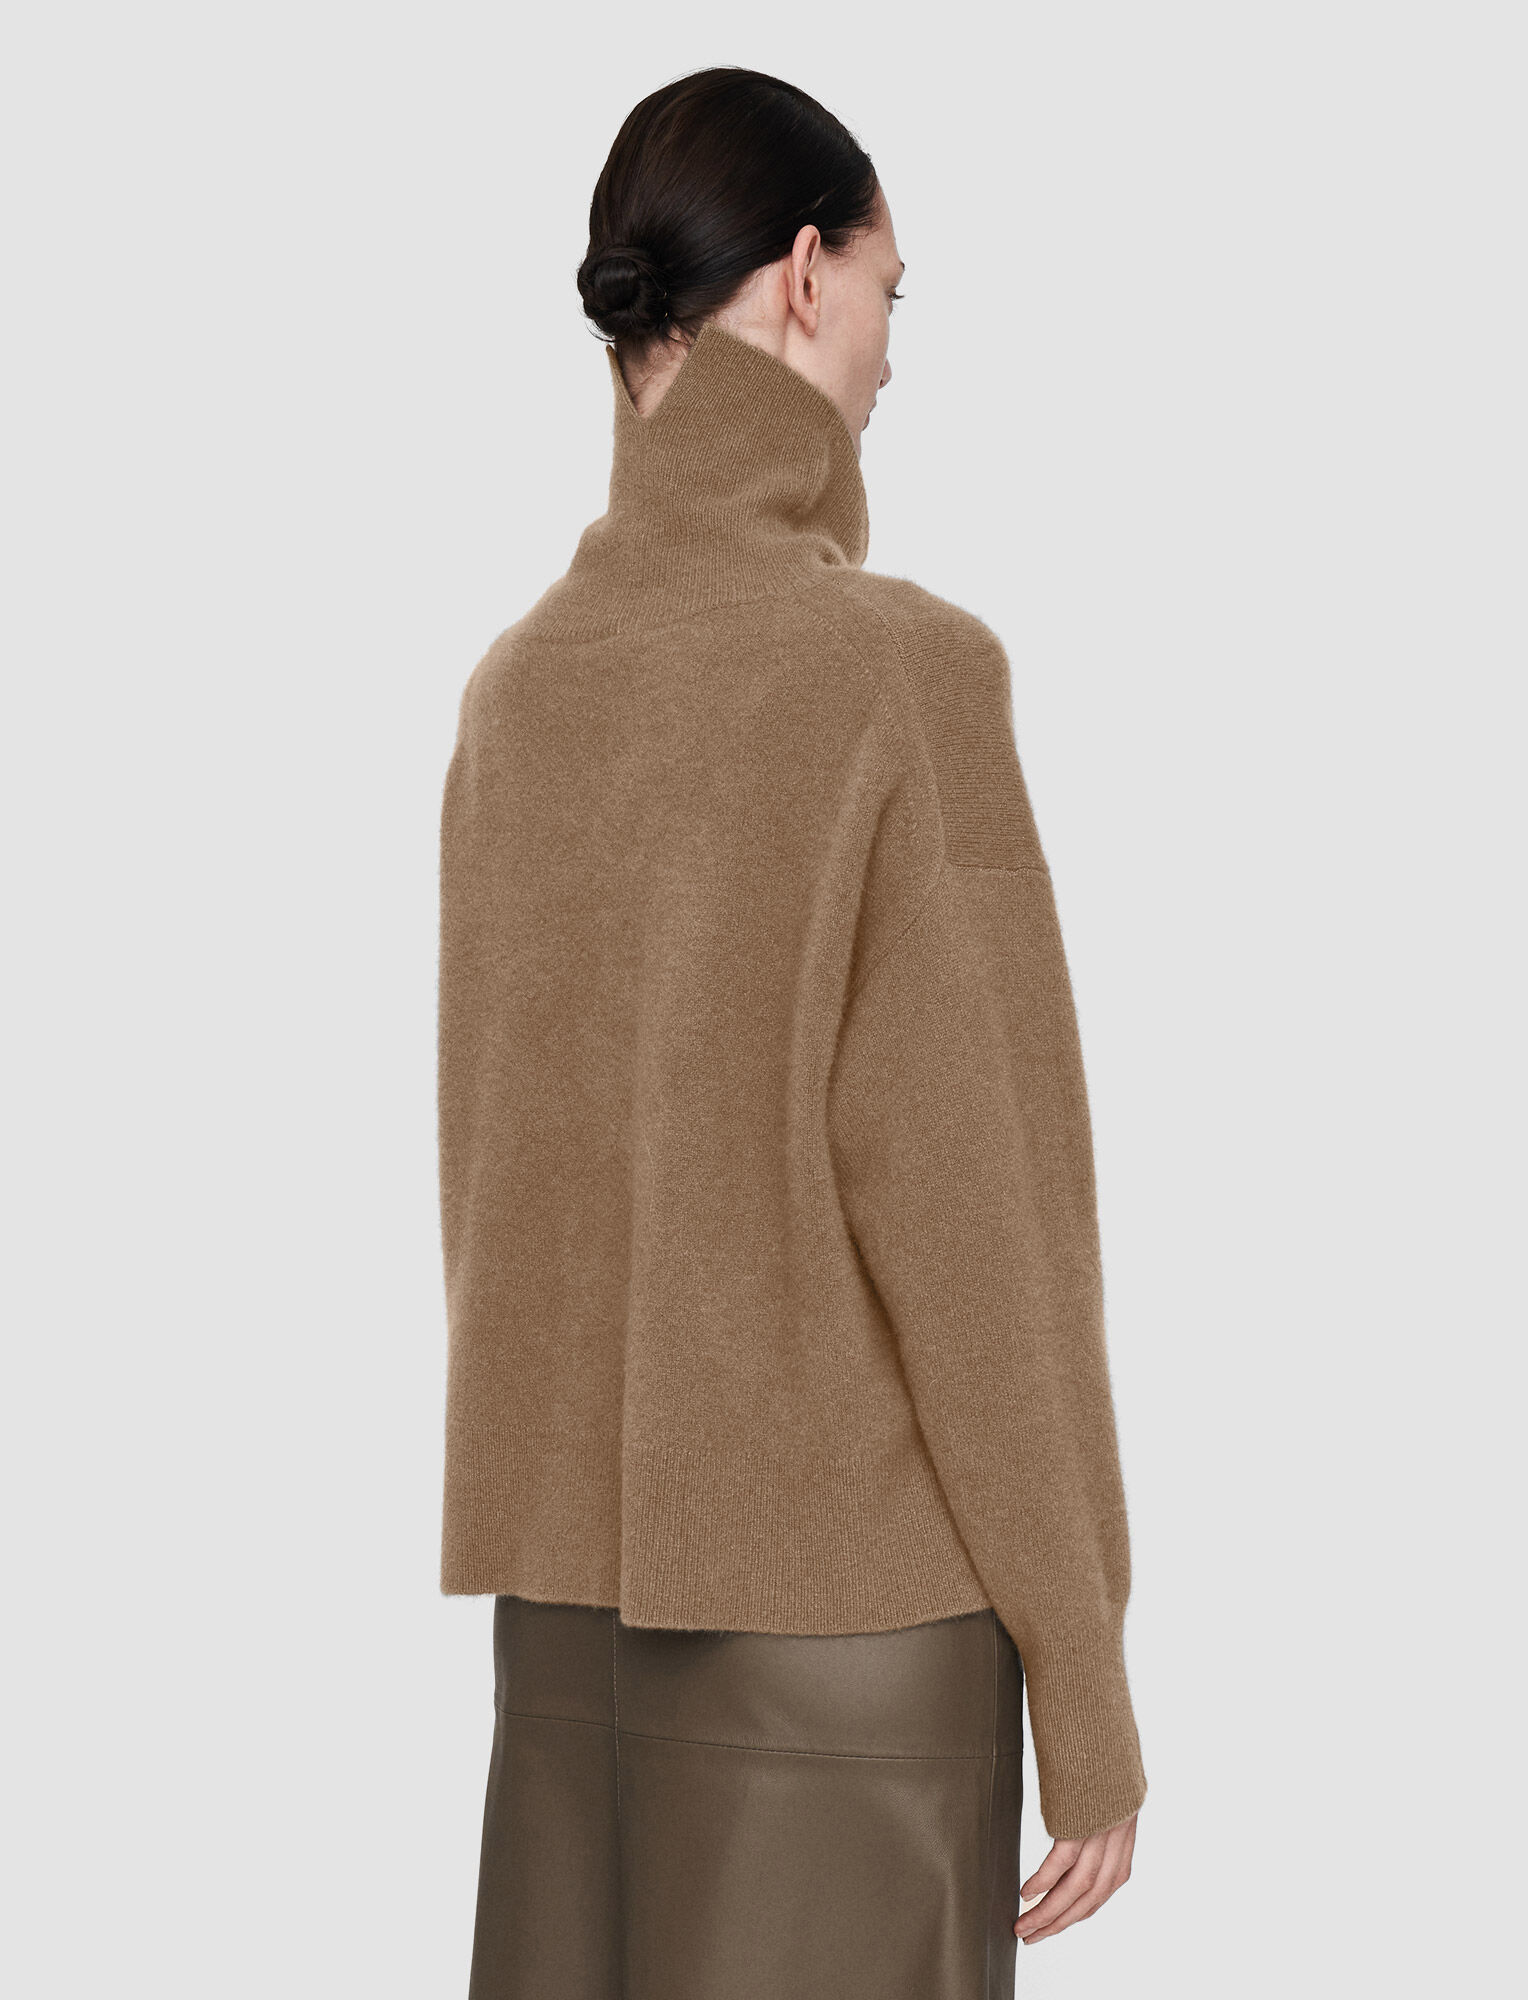 Joseph, Brushed Cashmere High Neck Jumper, in Hickory